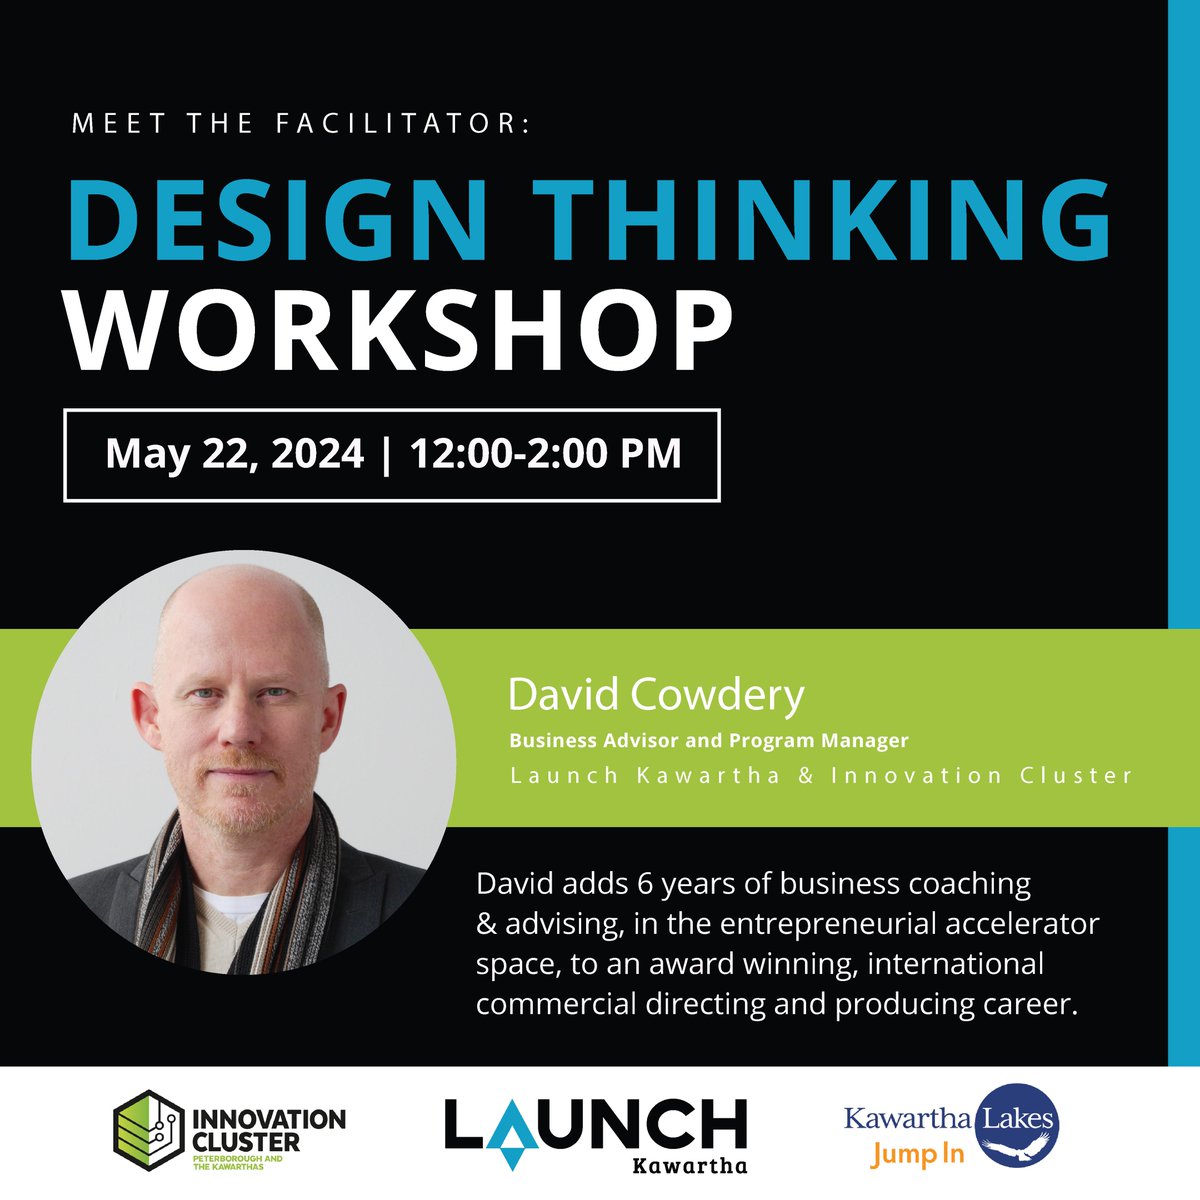 Entrepreneurs! Boost your biz with our Design Thinking Workshop, May 22 at Launch Kawartha. Led by expert David Cowdery. Learn customer insights, user-centric solutions & more! Register now! eventbrite.com/e/an-introduct…